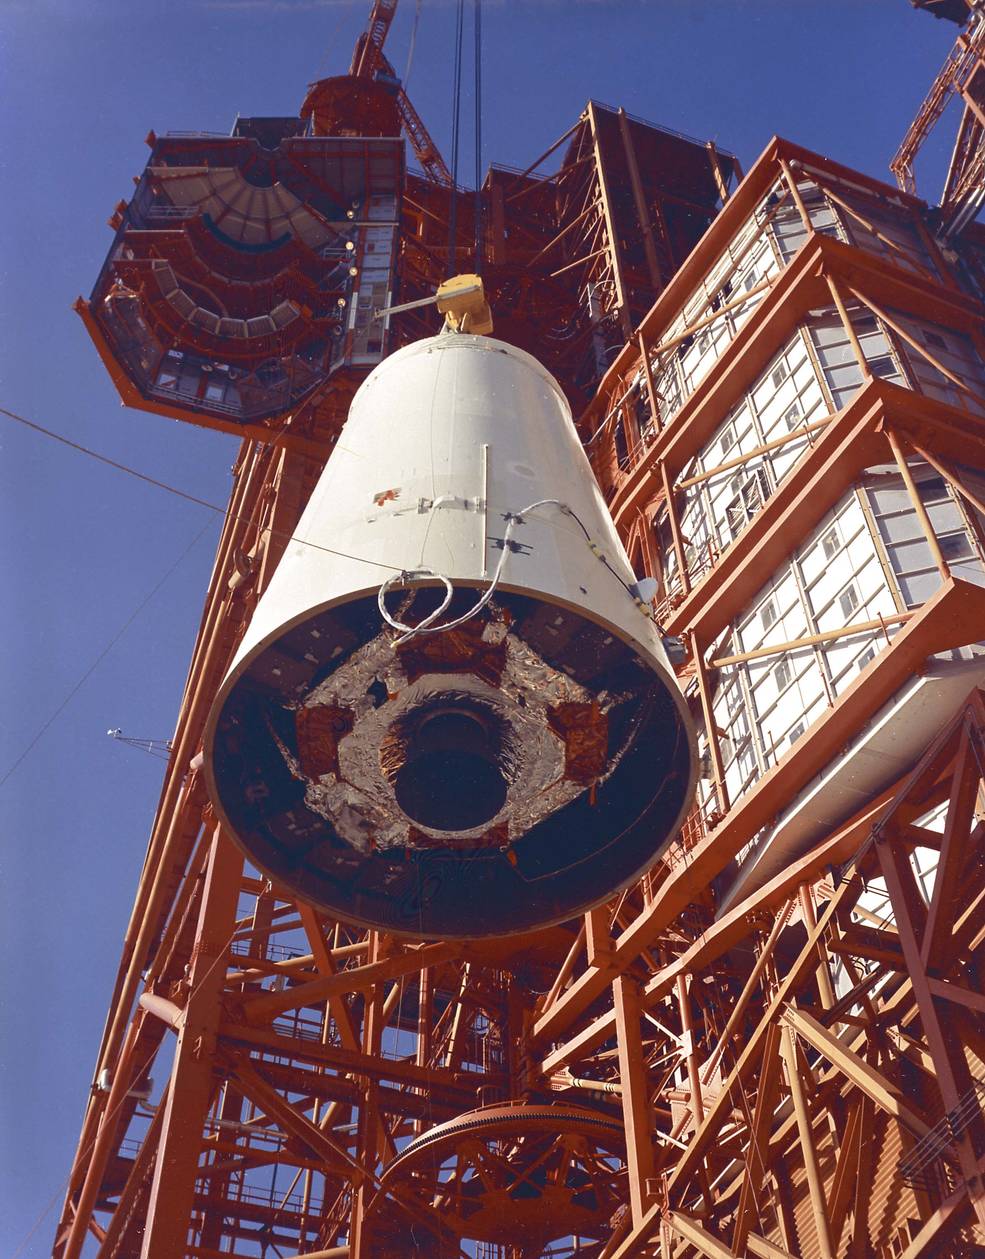 apollo_5_lm-1_being_hoisted_onto_saturn_1b